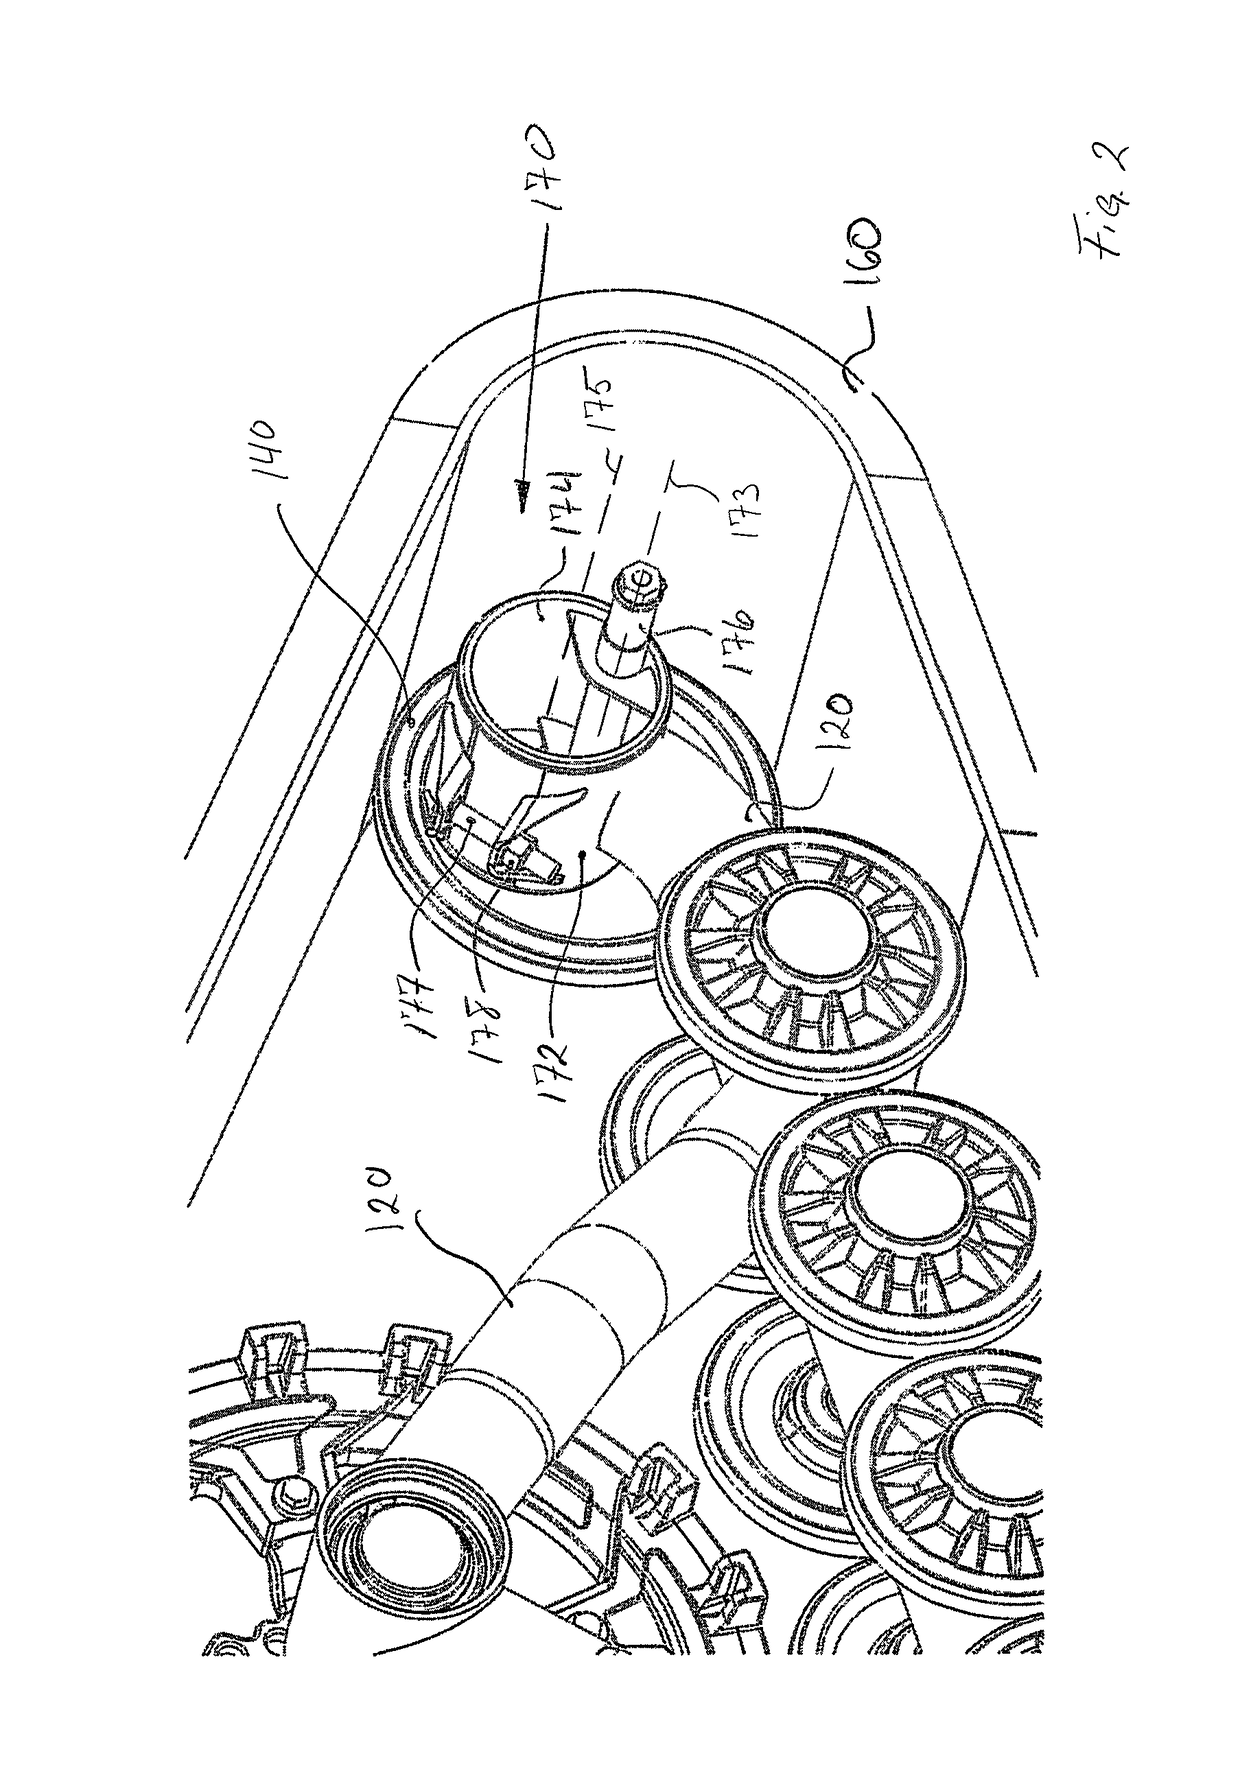 Track system with adjustable idler wheels and method of using the same